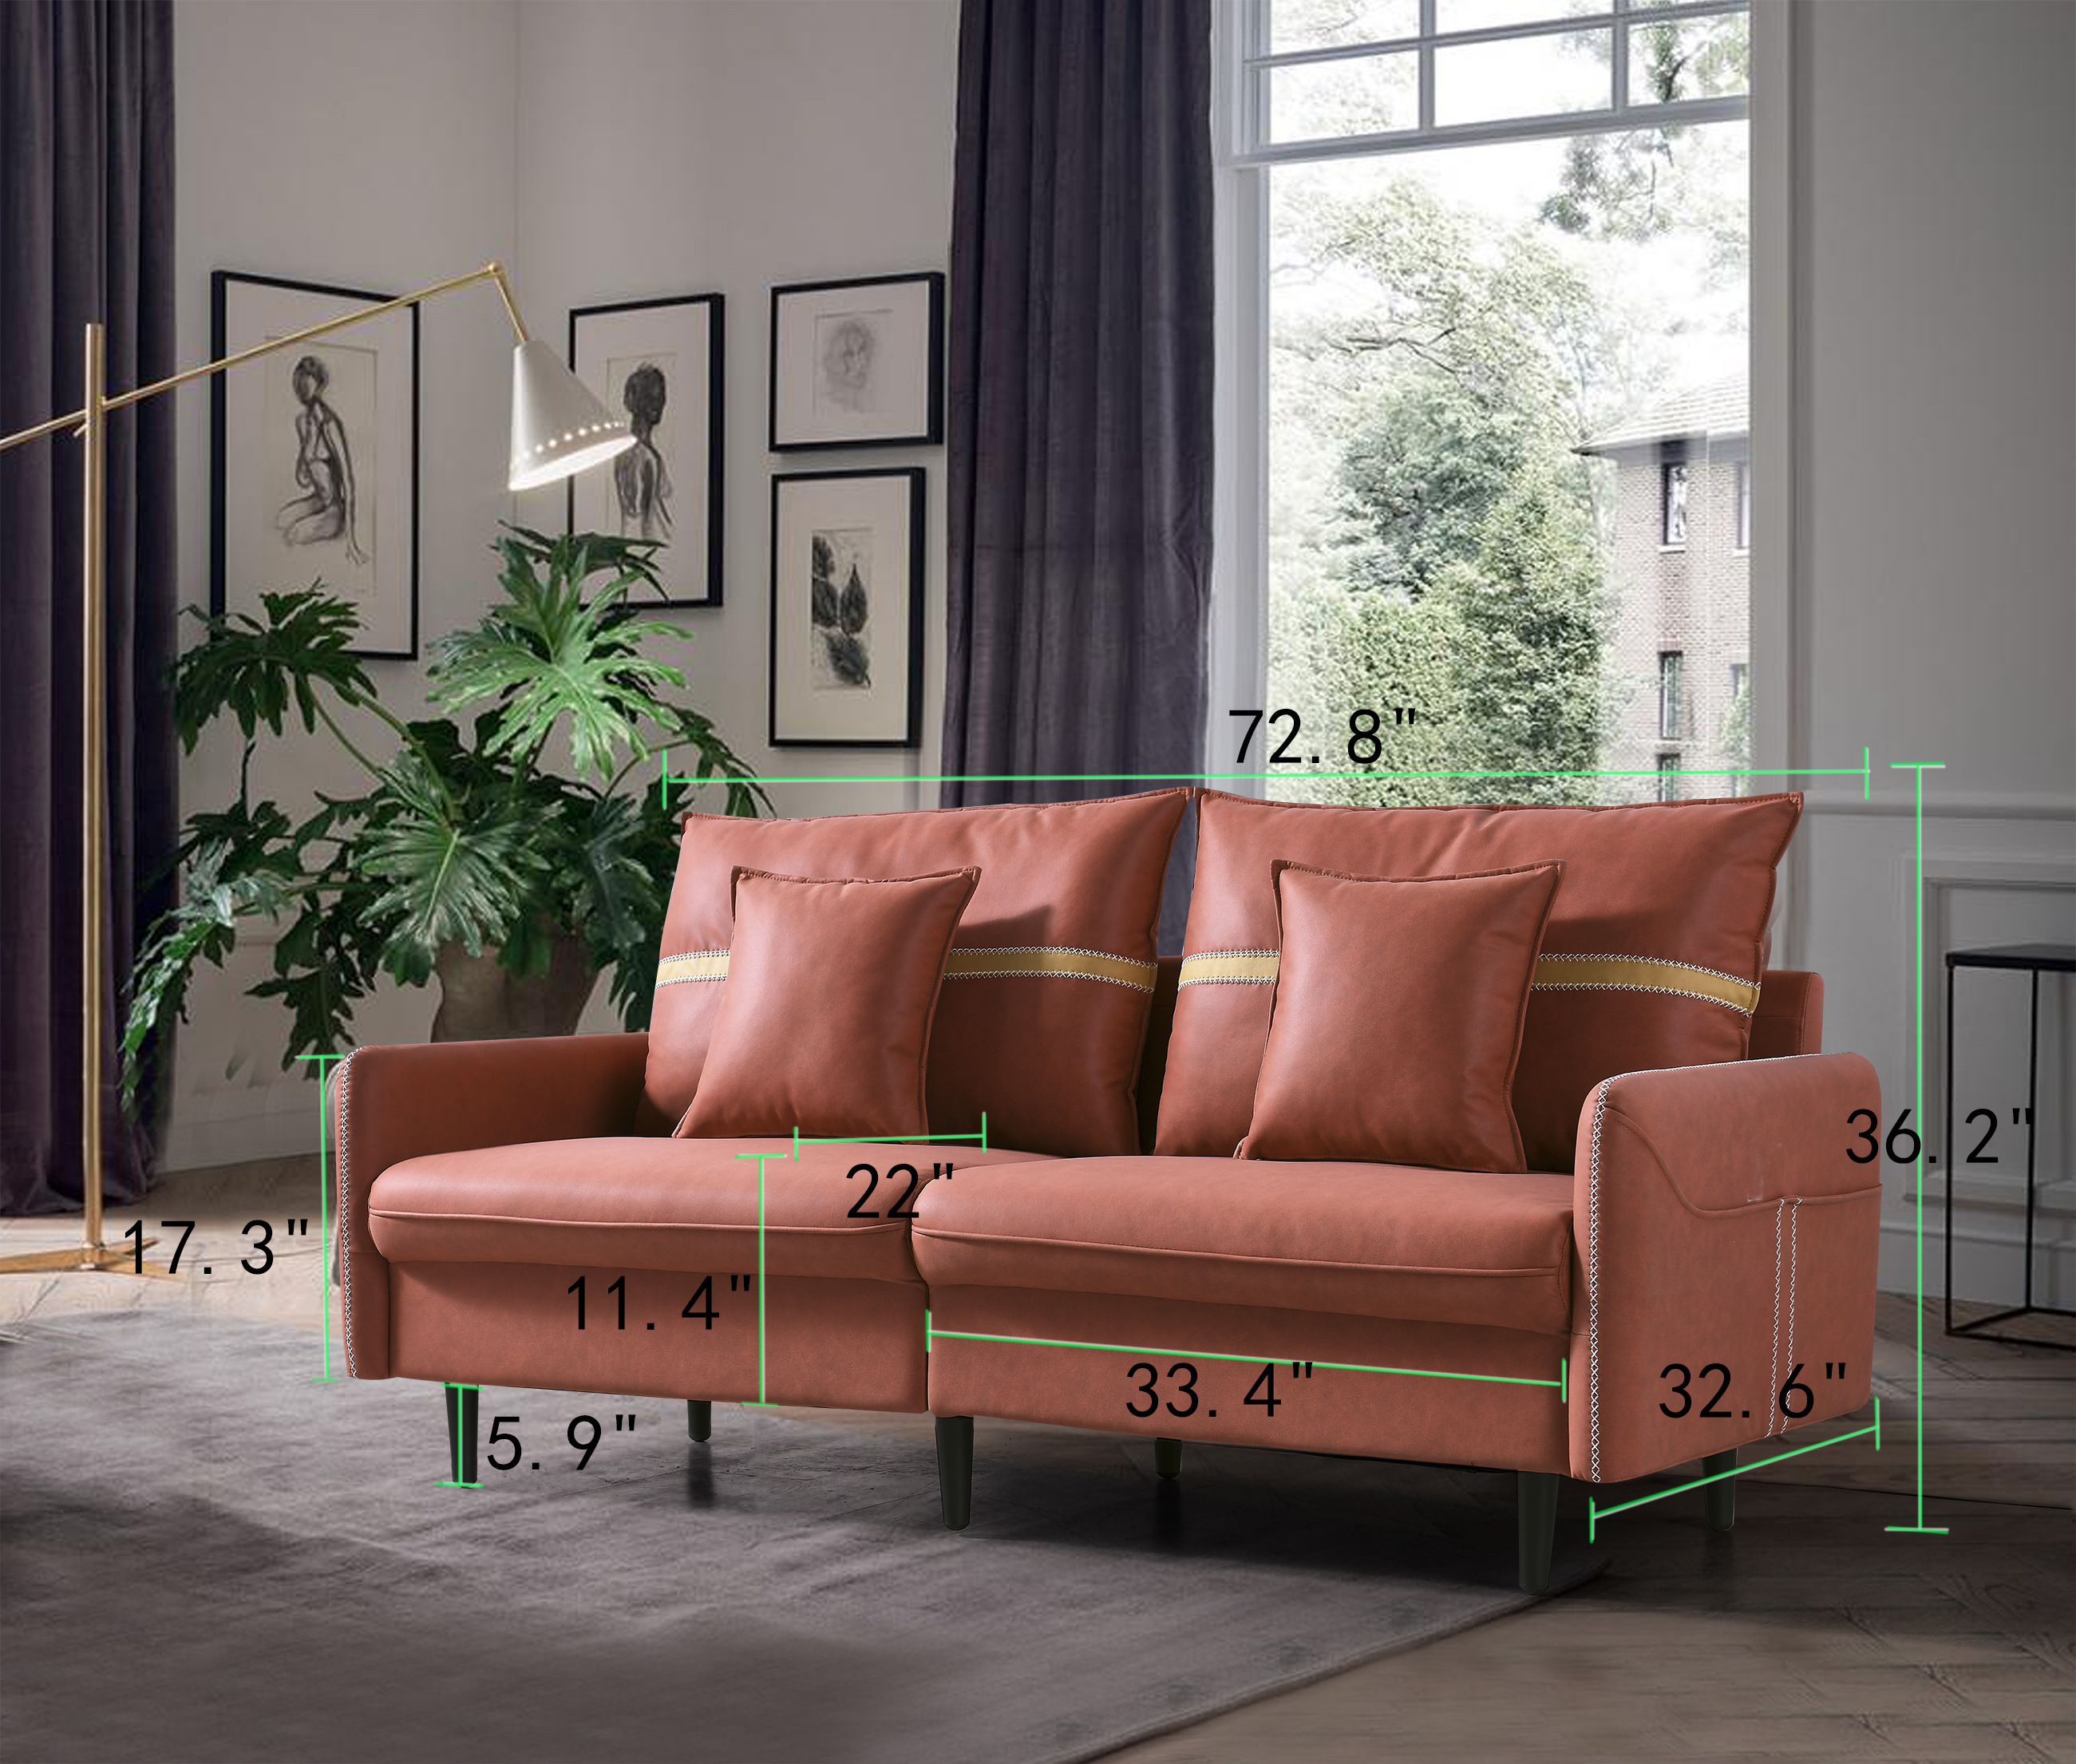 3-Seat Sofa Couch, Mid-Century  Tufted Love Seat for Living Room, Bedroom, Office, Apartment, Dorm, Studio and Small Space, 2Pillows Included(Orange)-Boyel Living